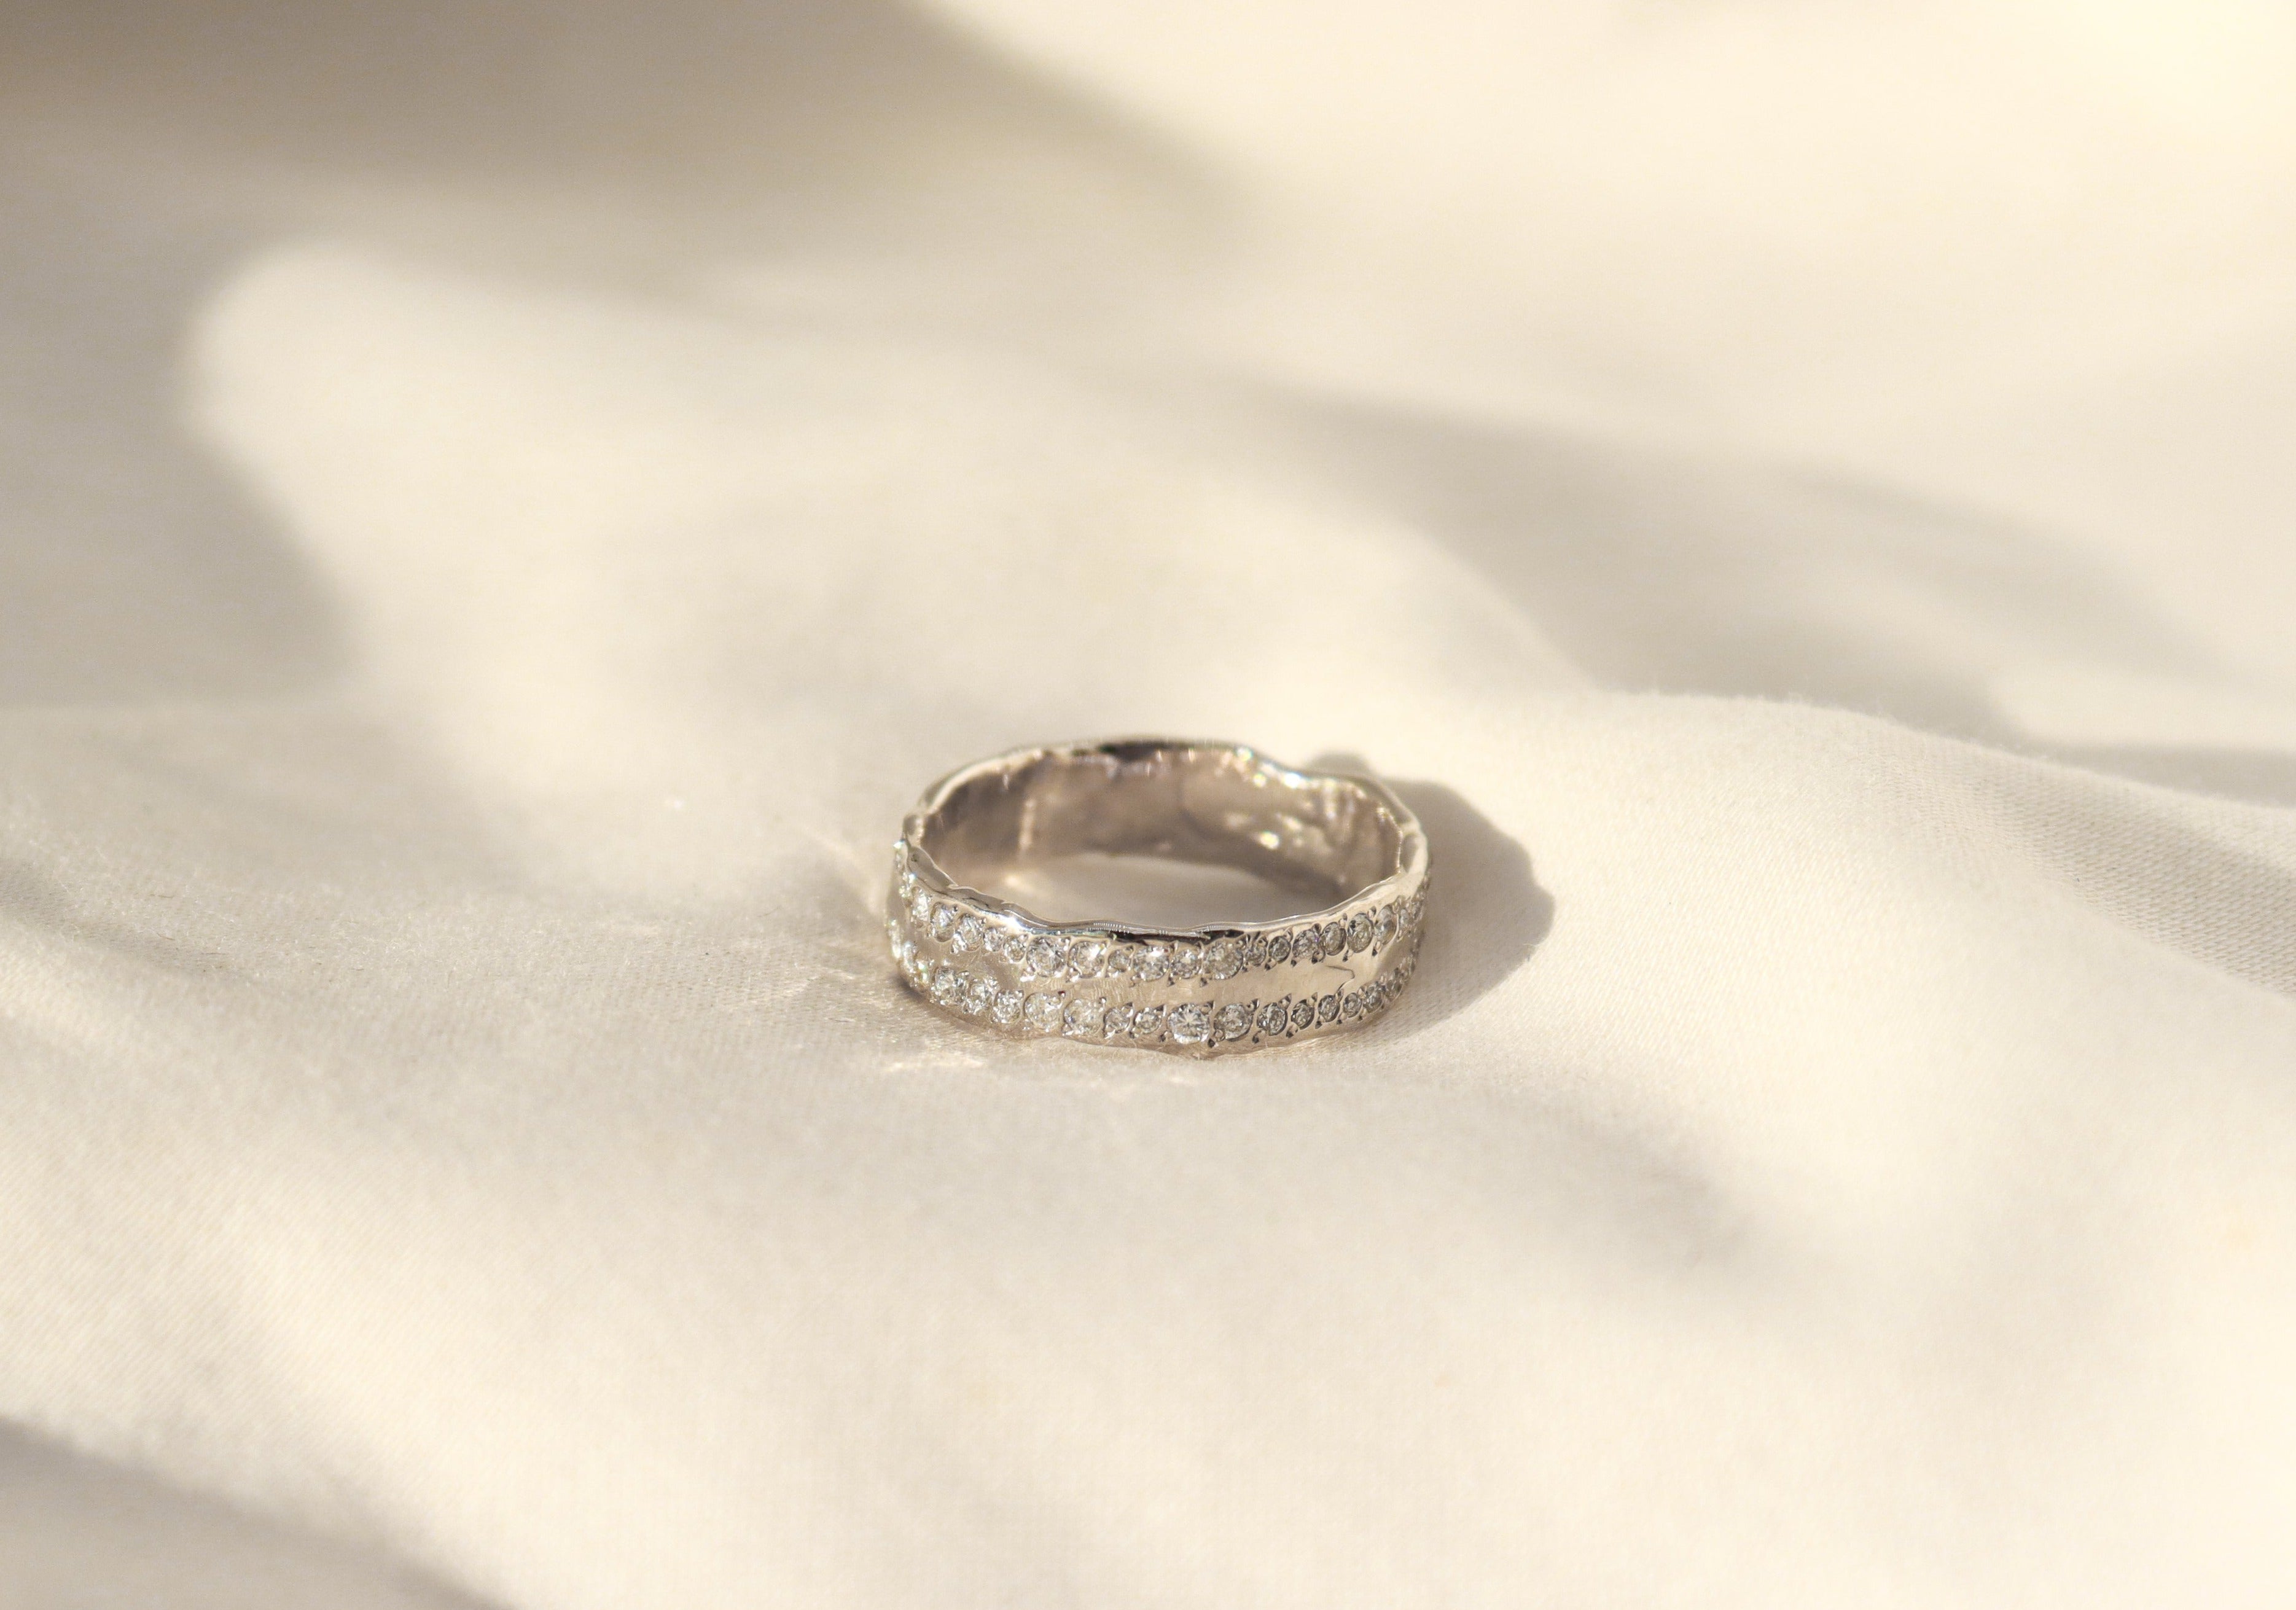 womens 14k white gold wedding band with two rows of pave diamonds and an organic texture